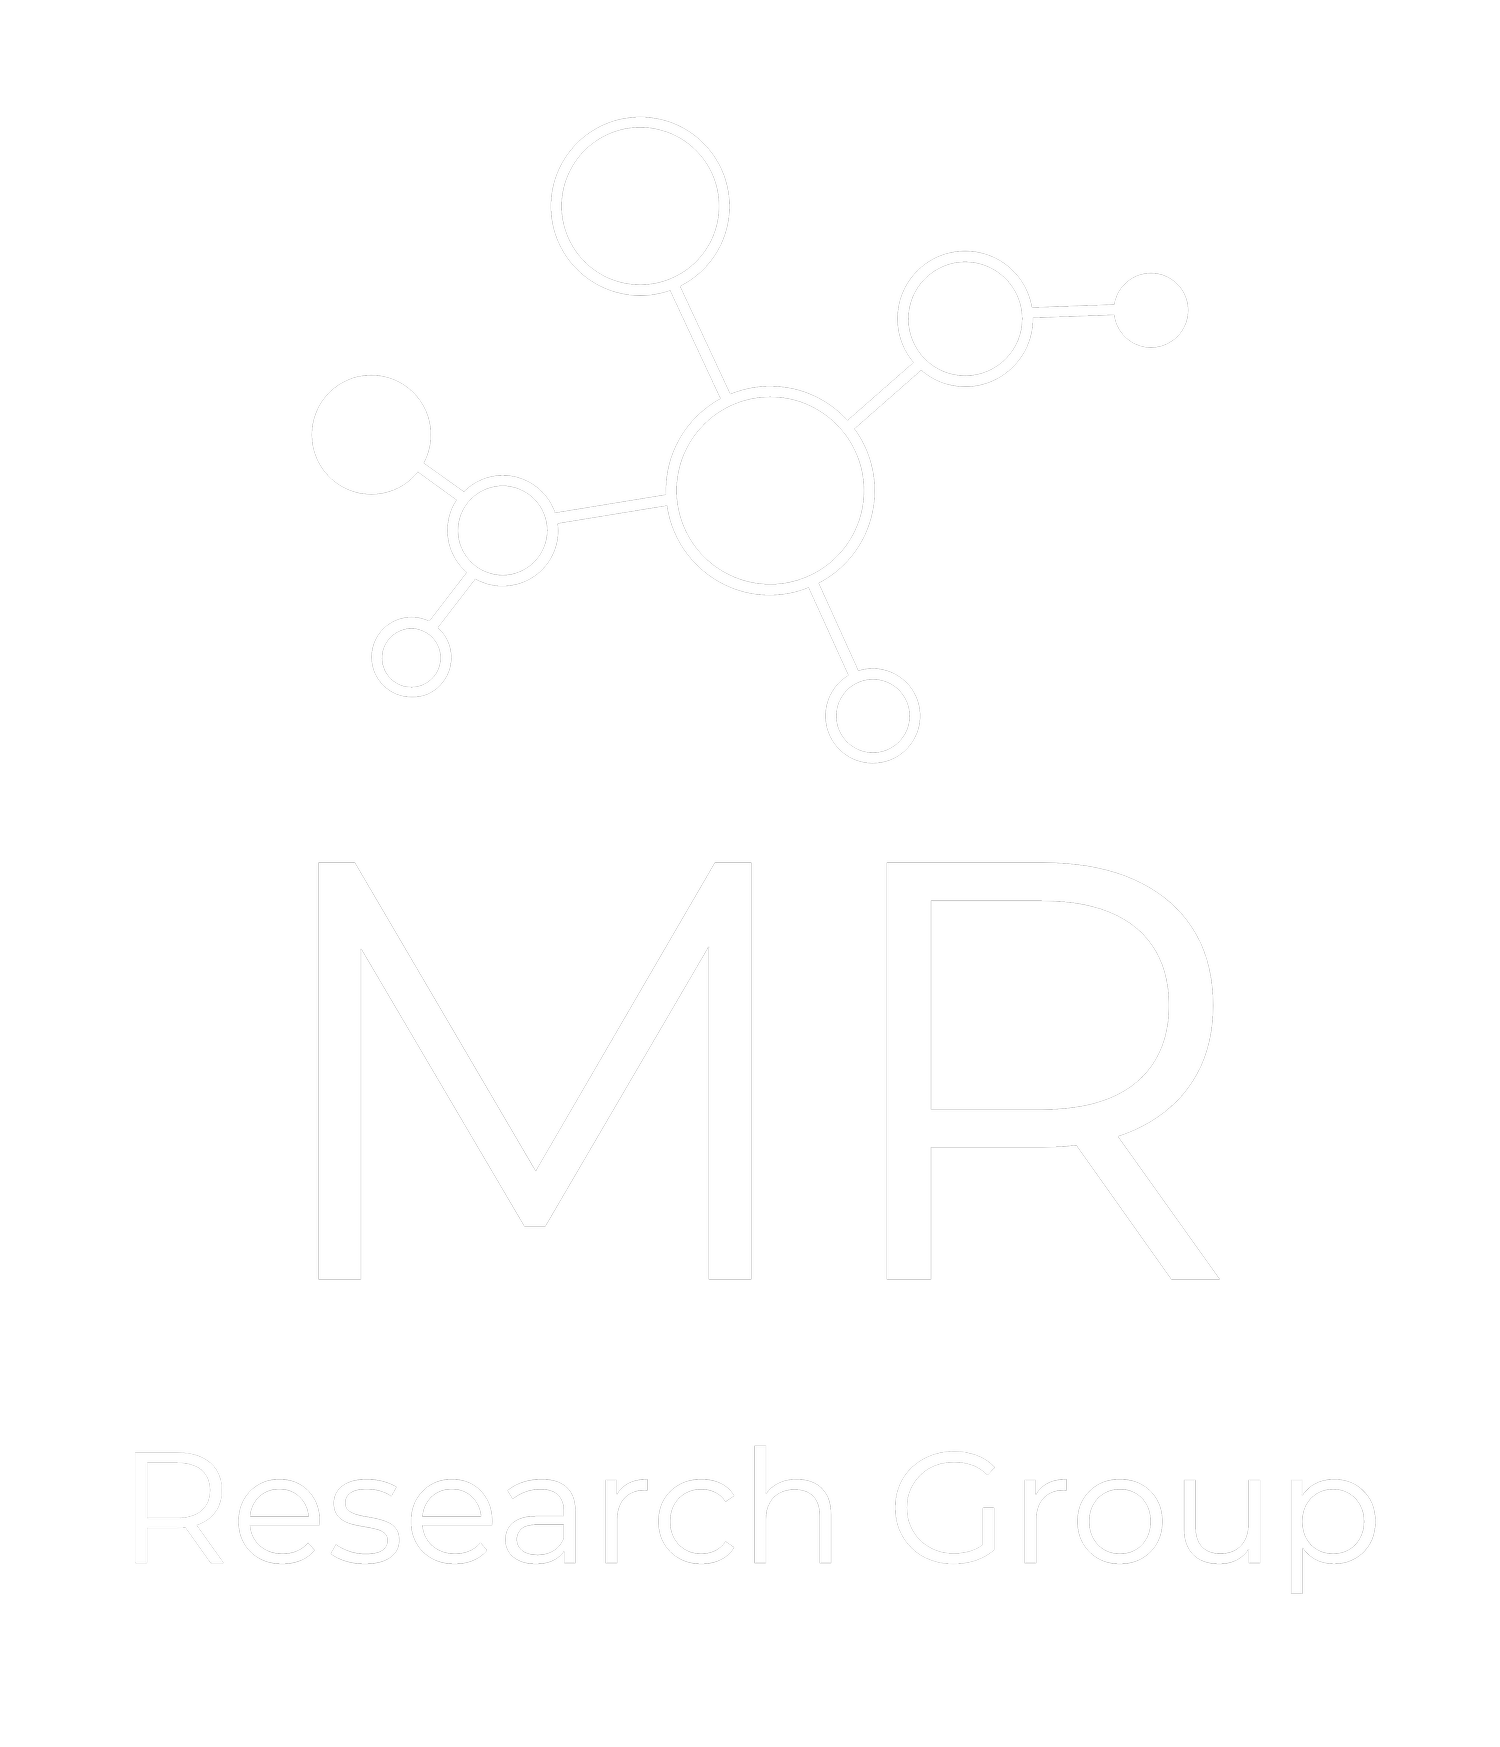 Magnus Rueping Research Group